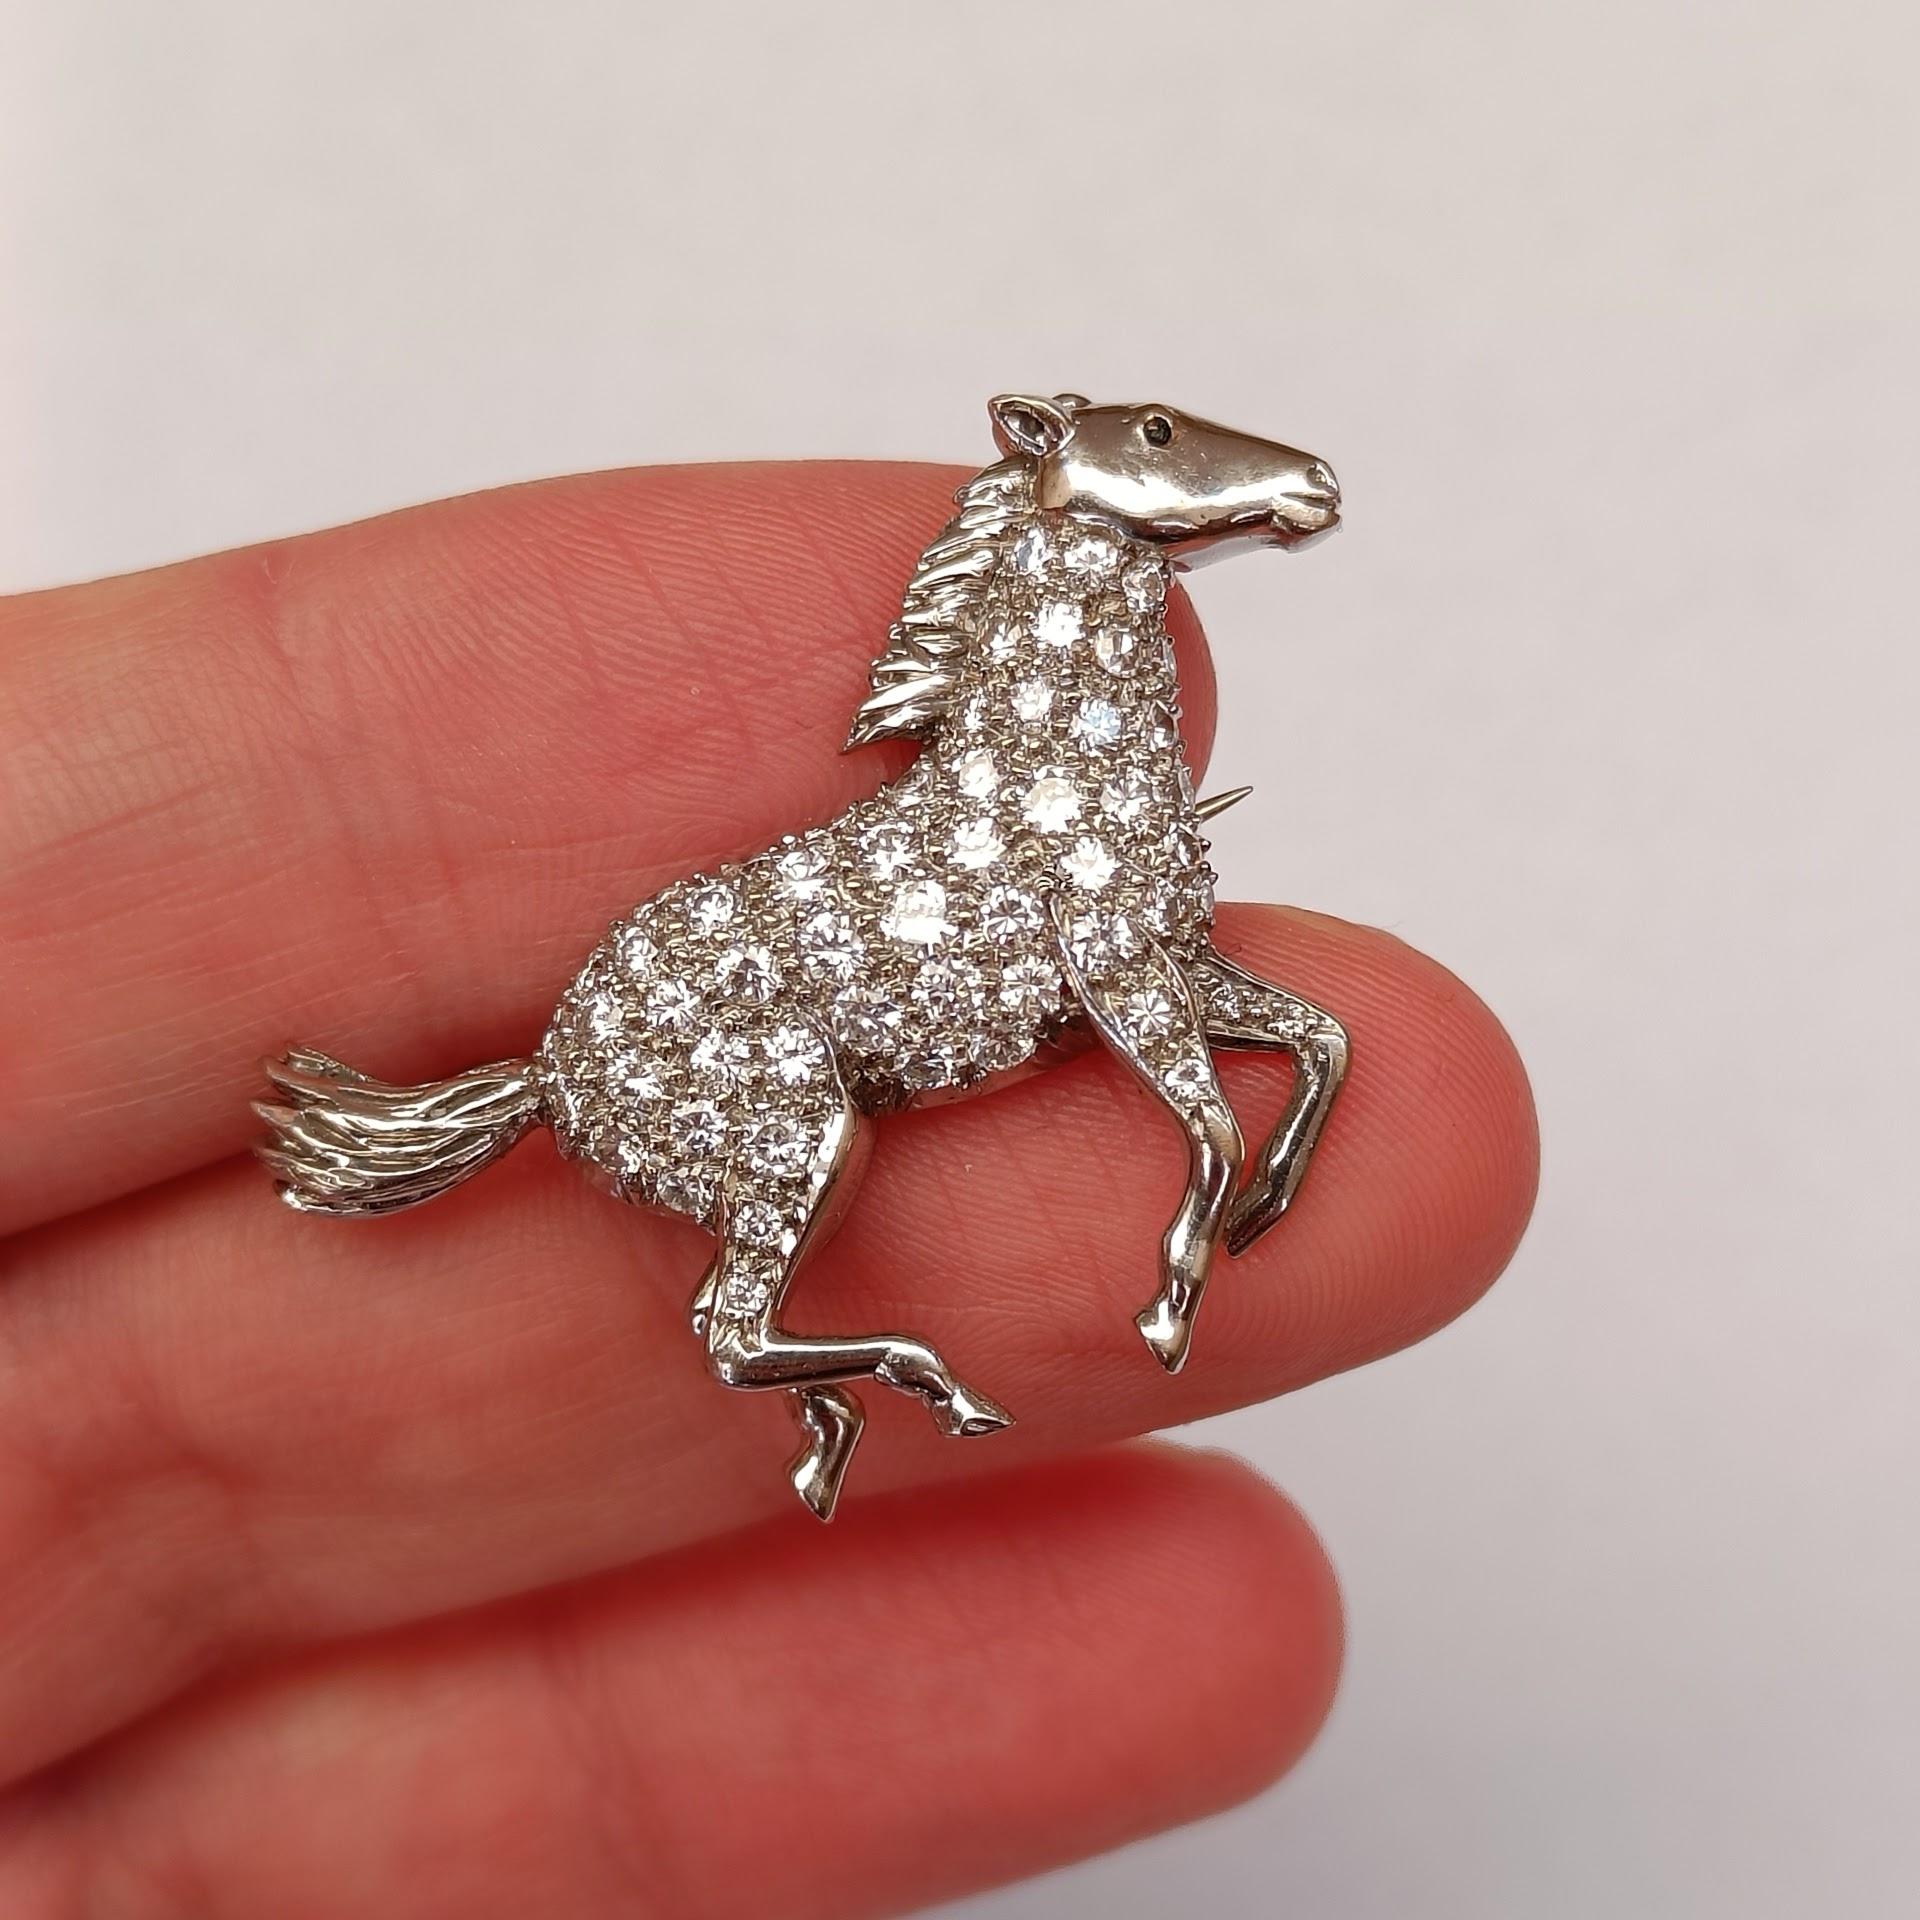 An 18k white gold brooch depicting a running horse, with diamond pave all over the body. Made by E. Wolfe & Co, London. Stamped EW & Co and 750.

Good condition, diamonds are of good quality, averaging VS-SI, I-L approximately, various